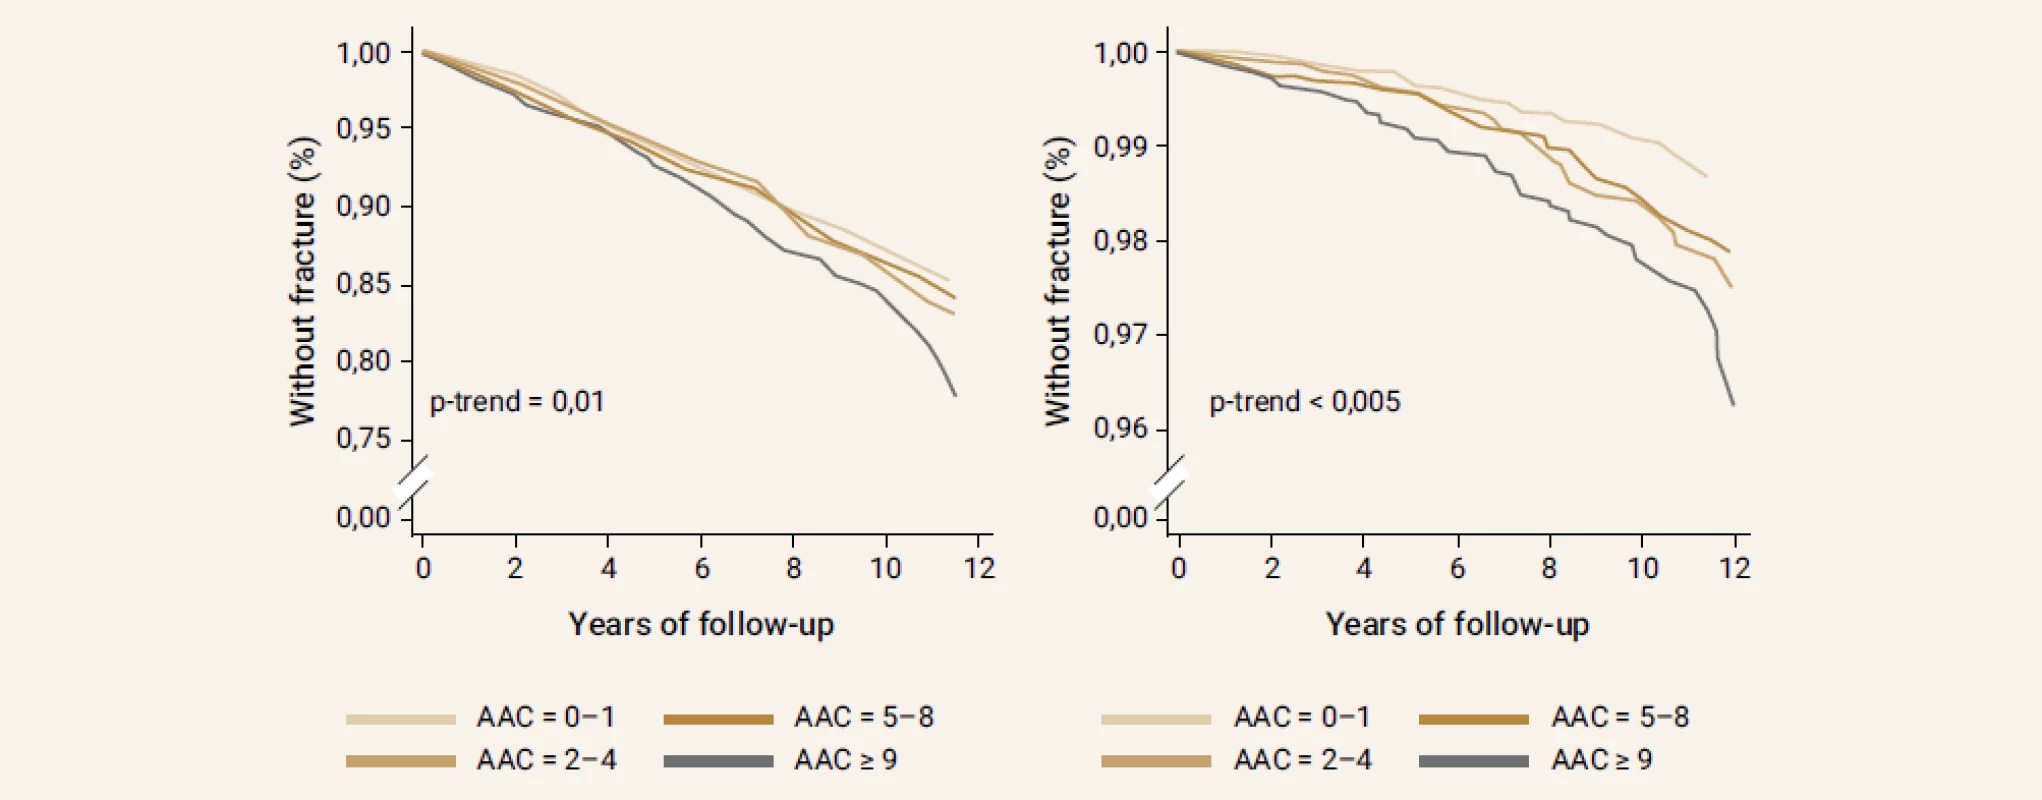 Fracture-free survival in 5 400 men aged ≥ 65 from the MrOS cohort followed up prospectively for the
median of 10.5 years (interquartile range, 8.5–11.2). Fracture-free survival is presented according to the
quartiles of the AAC score (adjusted for age, body mass index, center, race, hip bone mineral density, fall
history, prior fracture, smoking, and co-morbidities): (A) non-vertebral fractures ( n = 805 men); (B) hip
fractures (n = 178 men). Reproduced from [117]